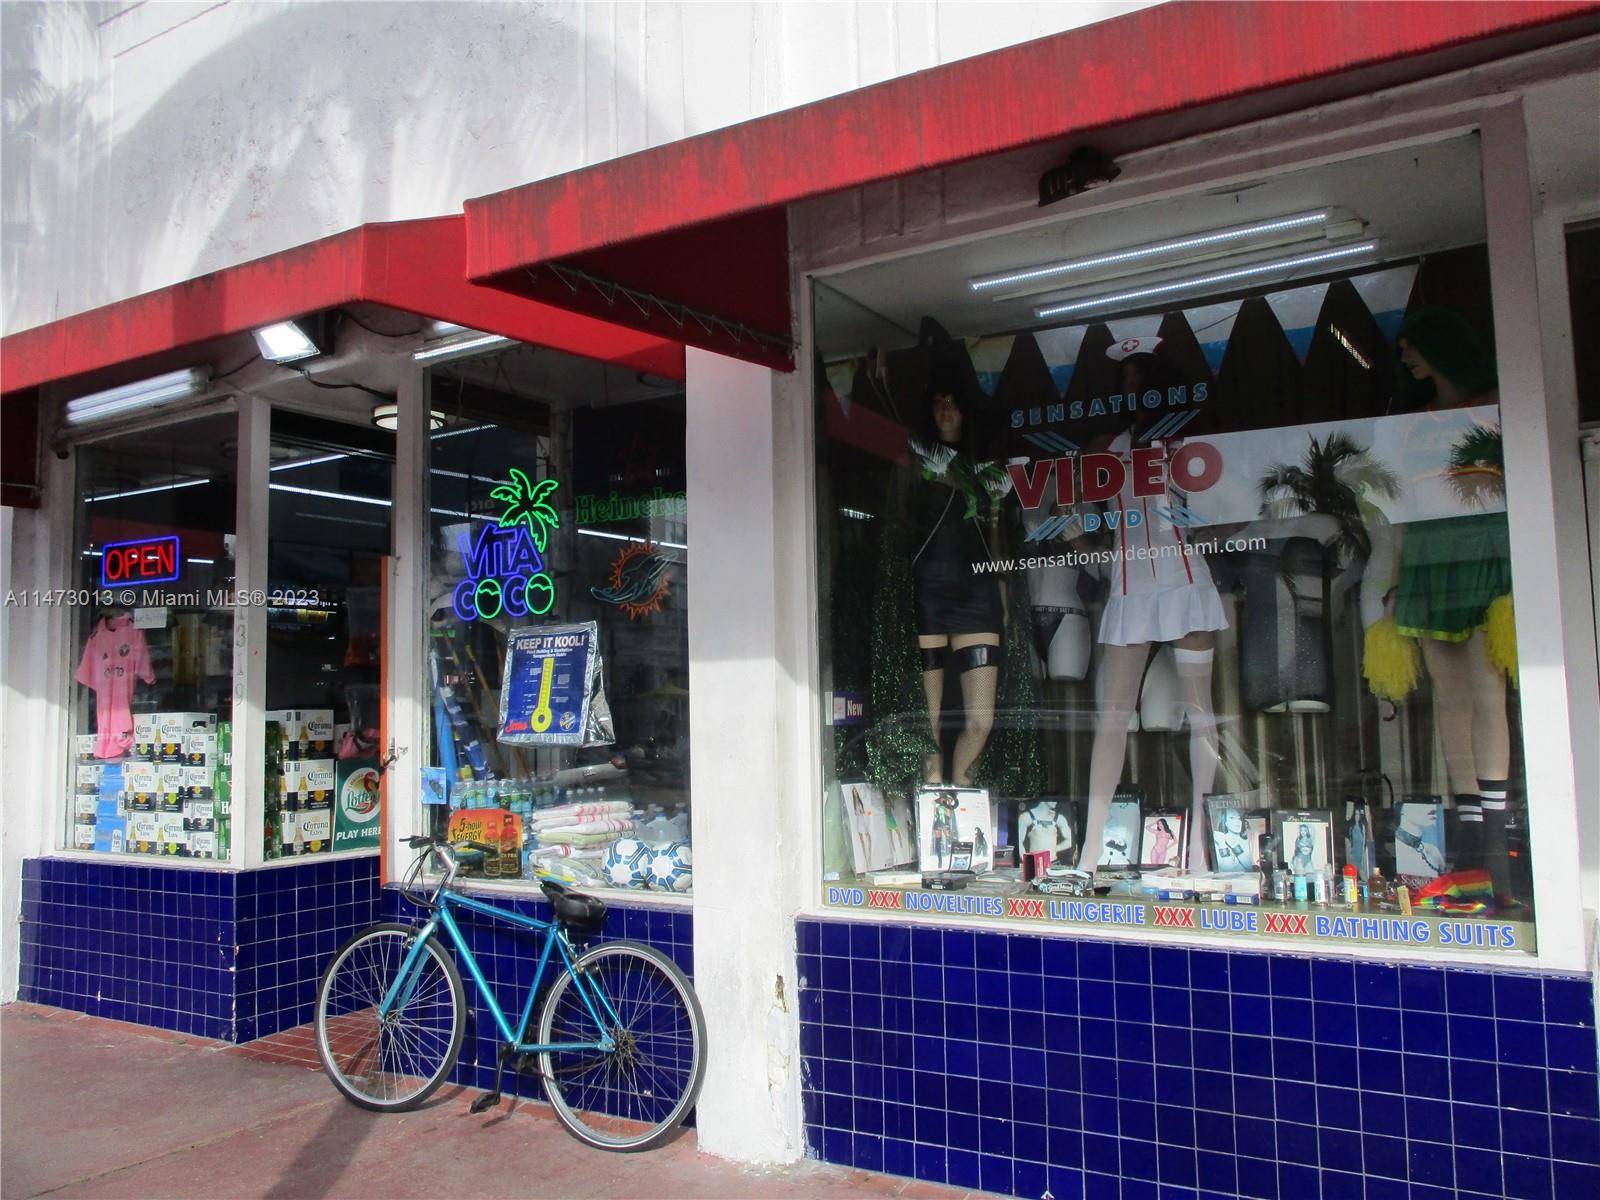 Fantastic Location, Right in the middle of South Beach on Busy Washington Ave 9, 266 sqft of Retail or Restaurant Space.